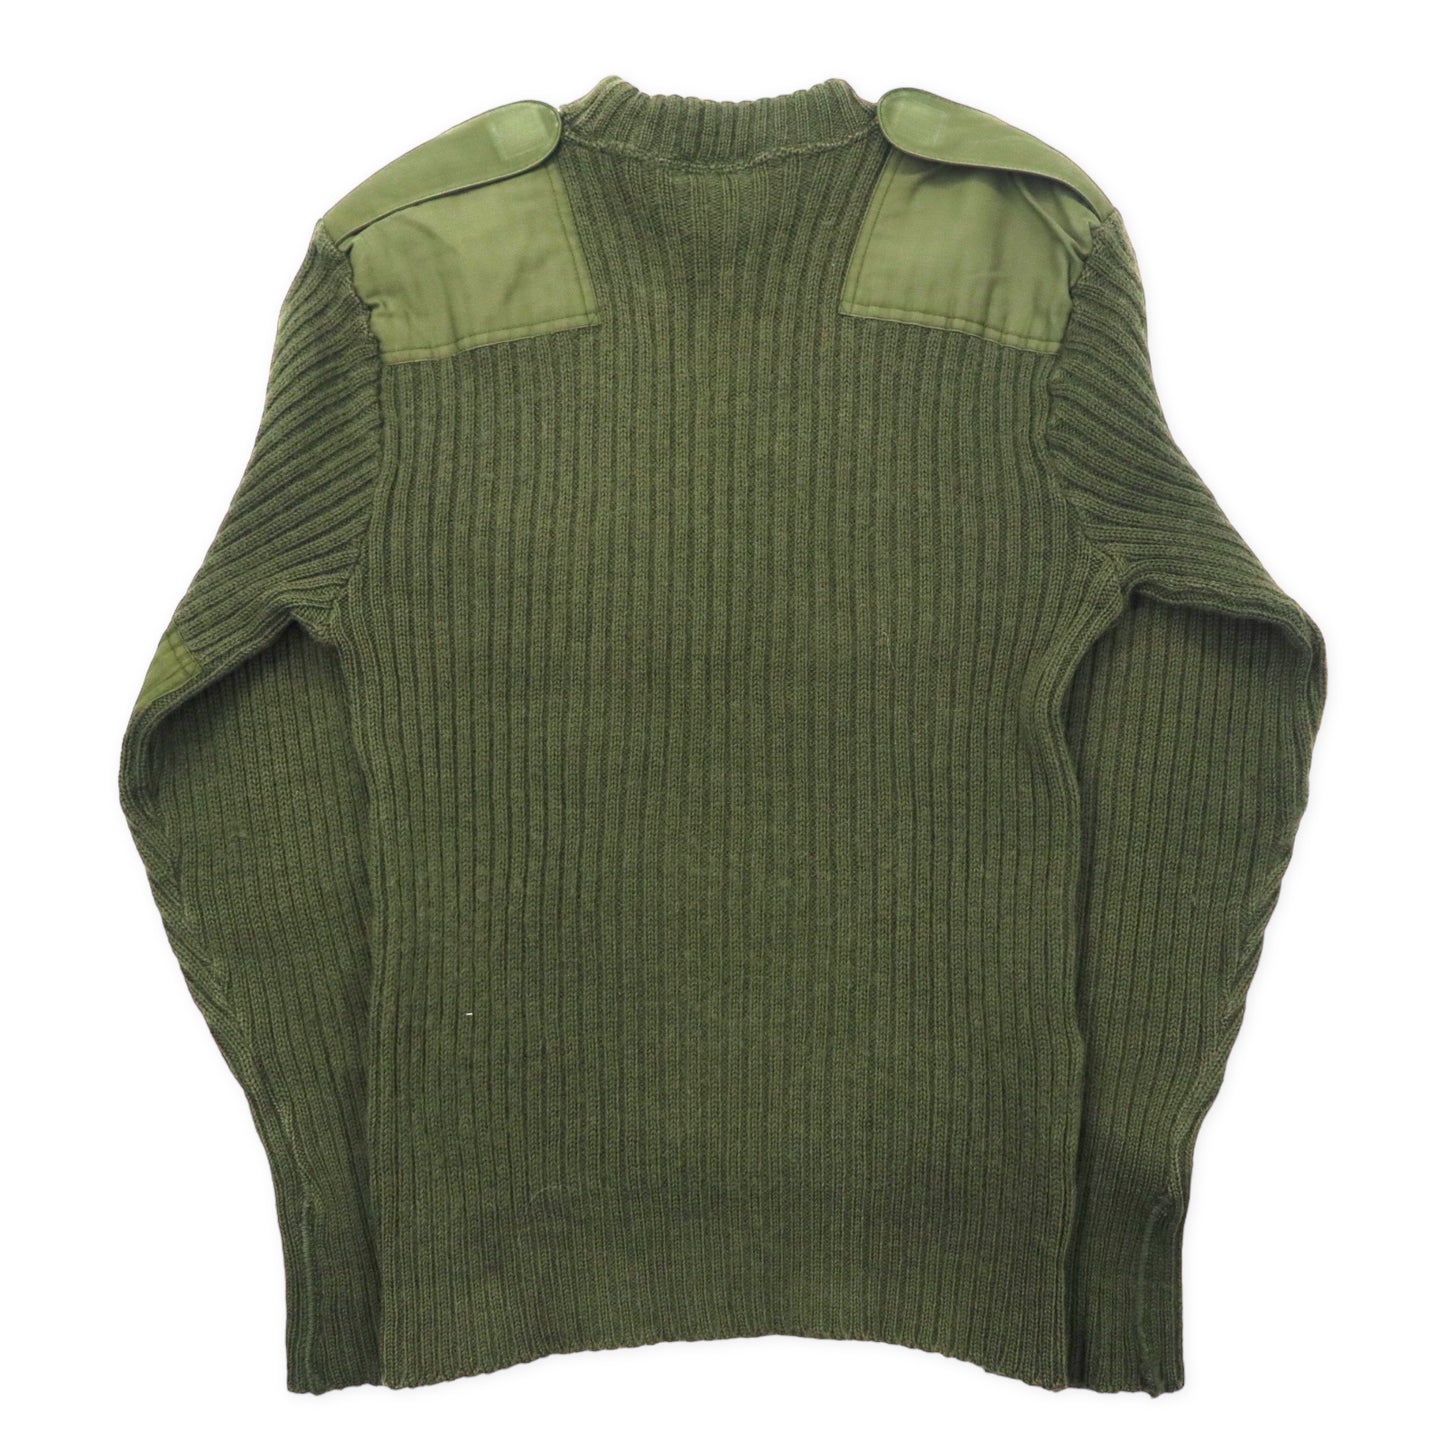 British Army 90's Command Knit Sweater L KHAKI Wool Military Elbow ...